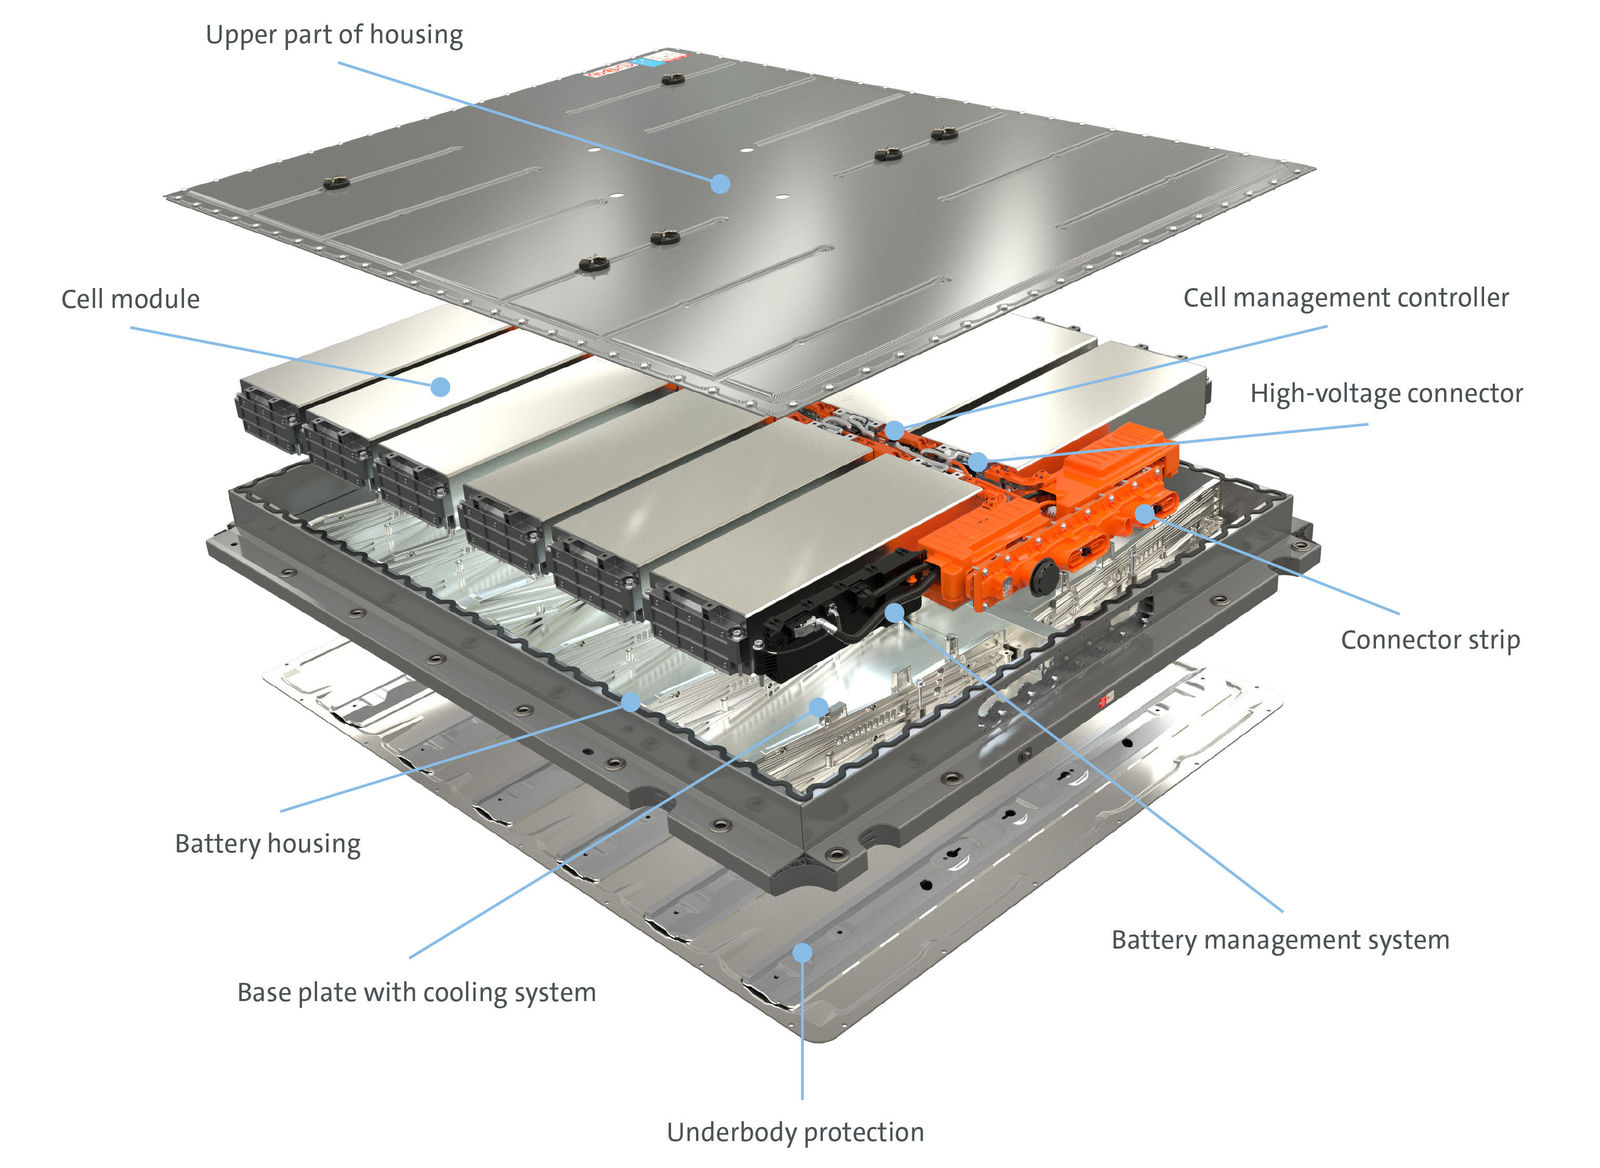 Key components for a new era – the battery system